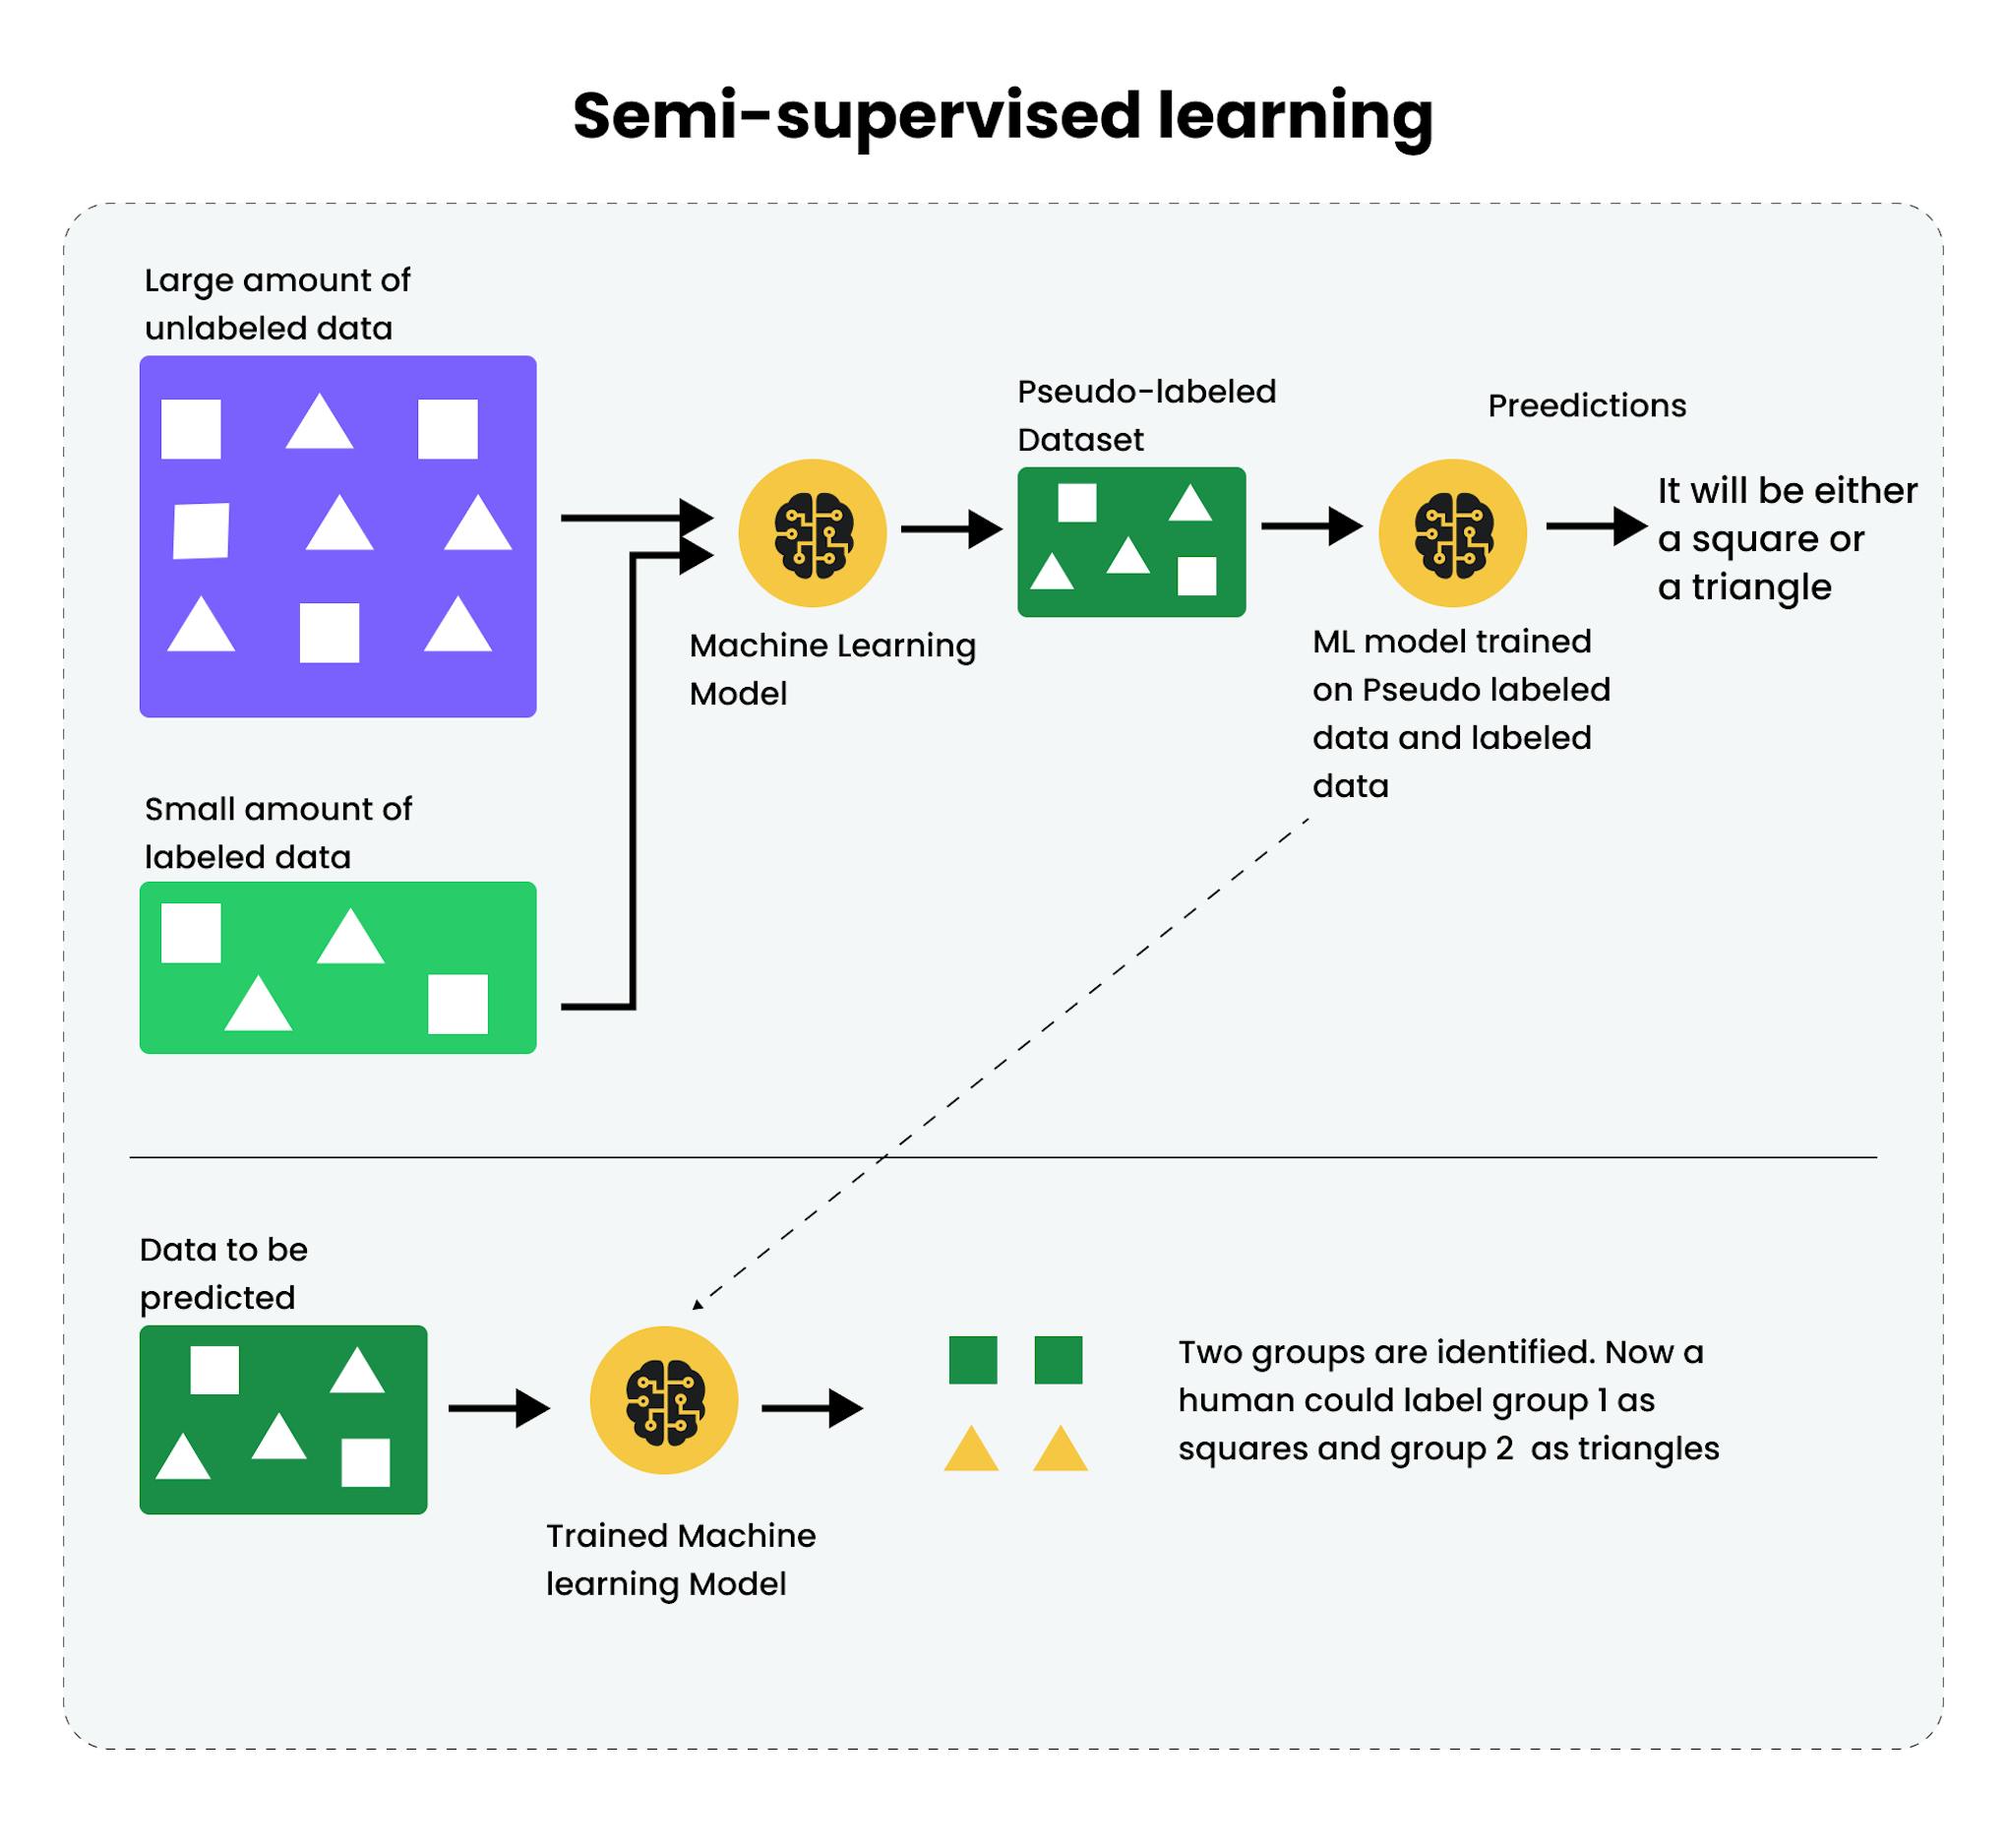 How does semi-supervised learning work?